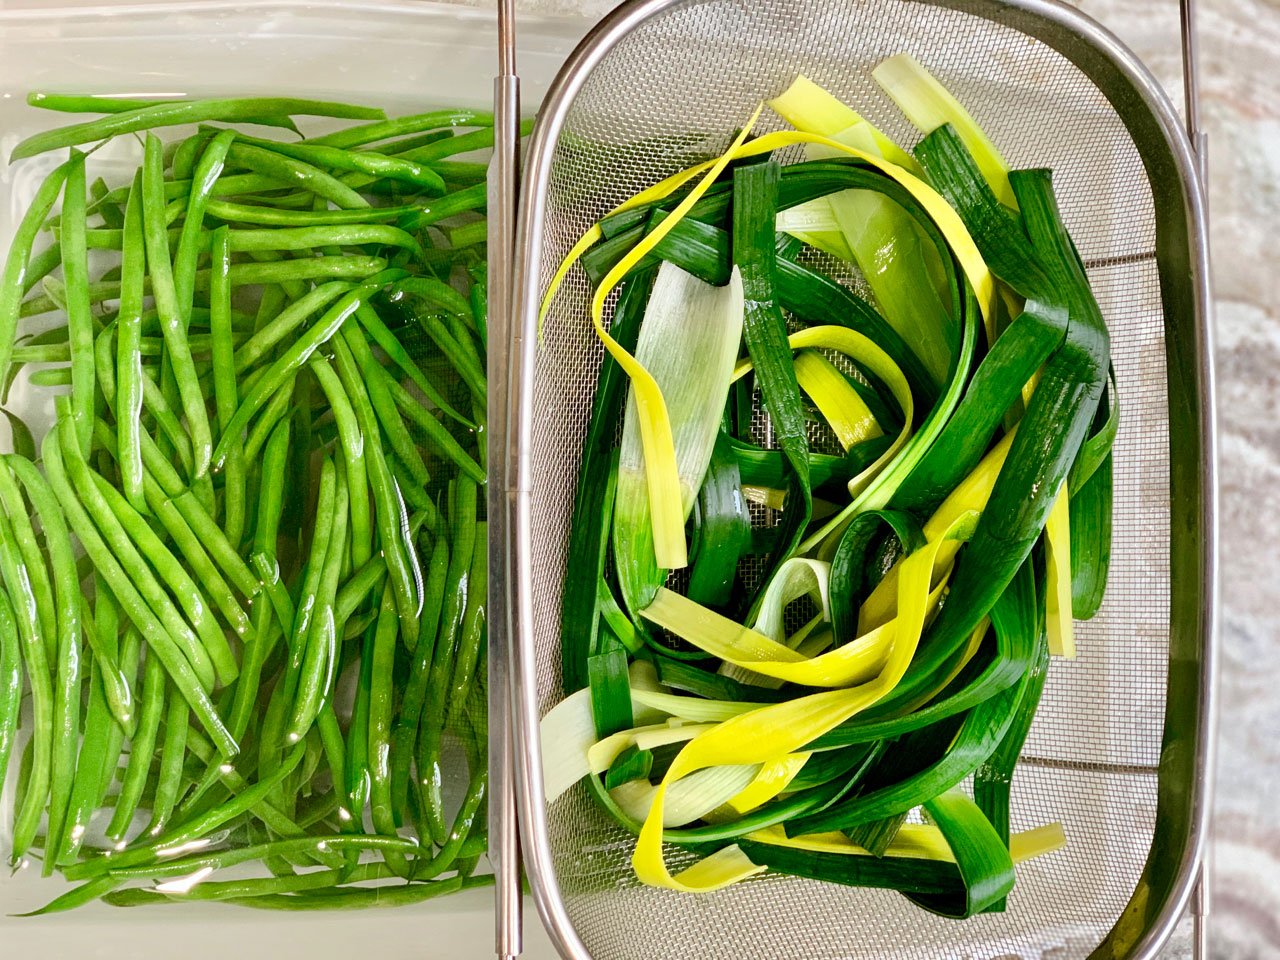 blanched green beans and leeks